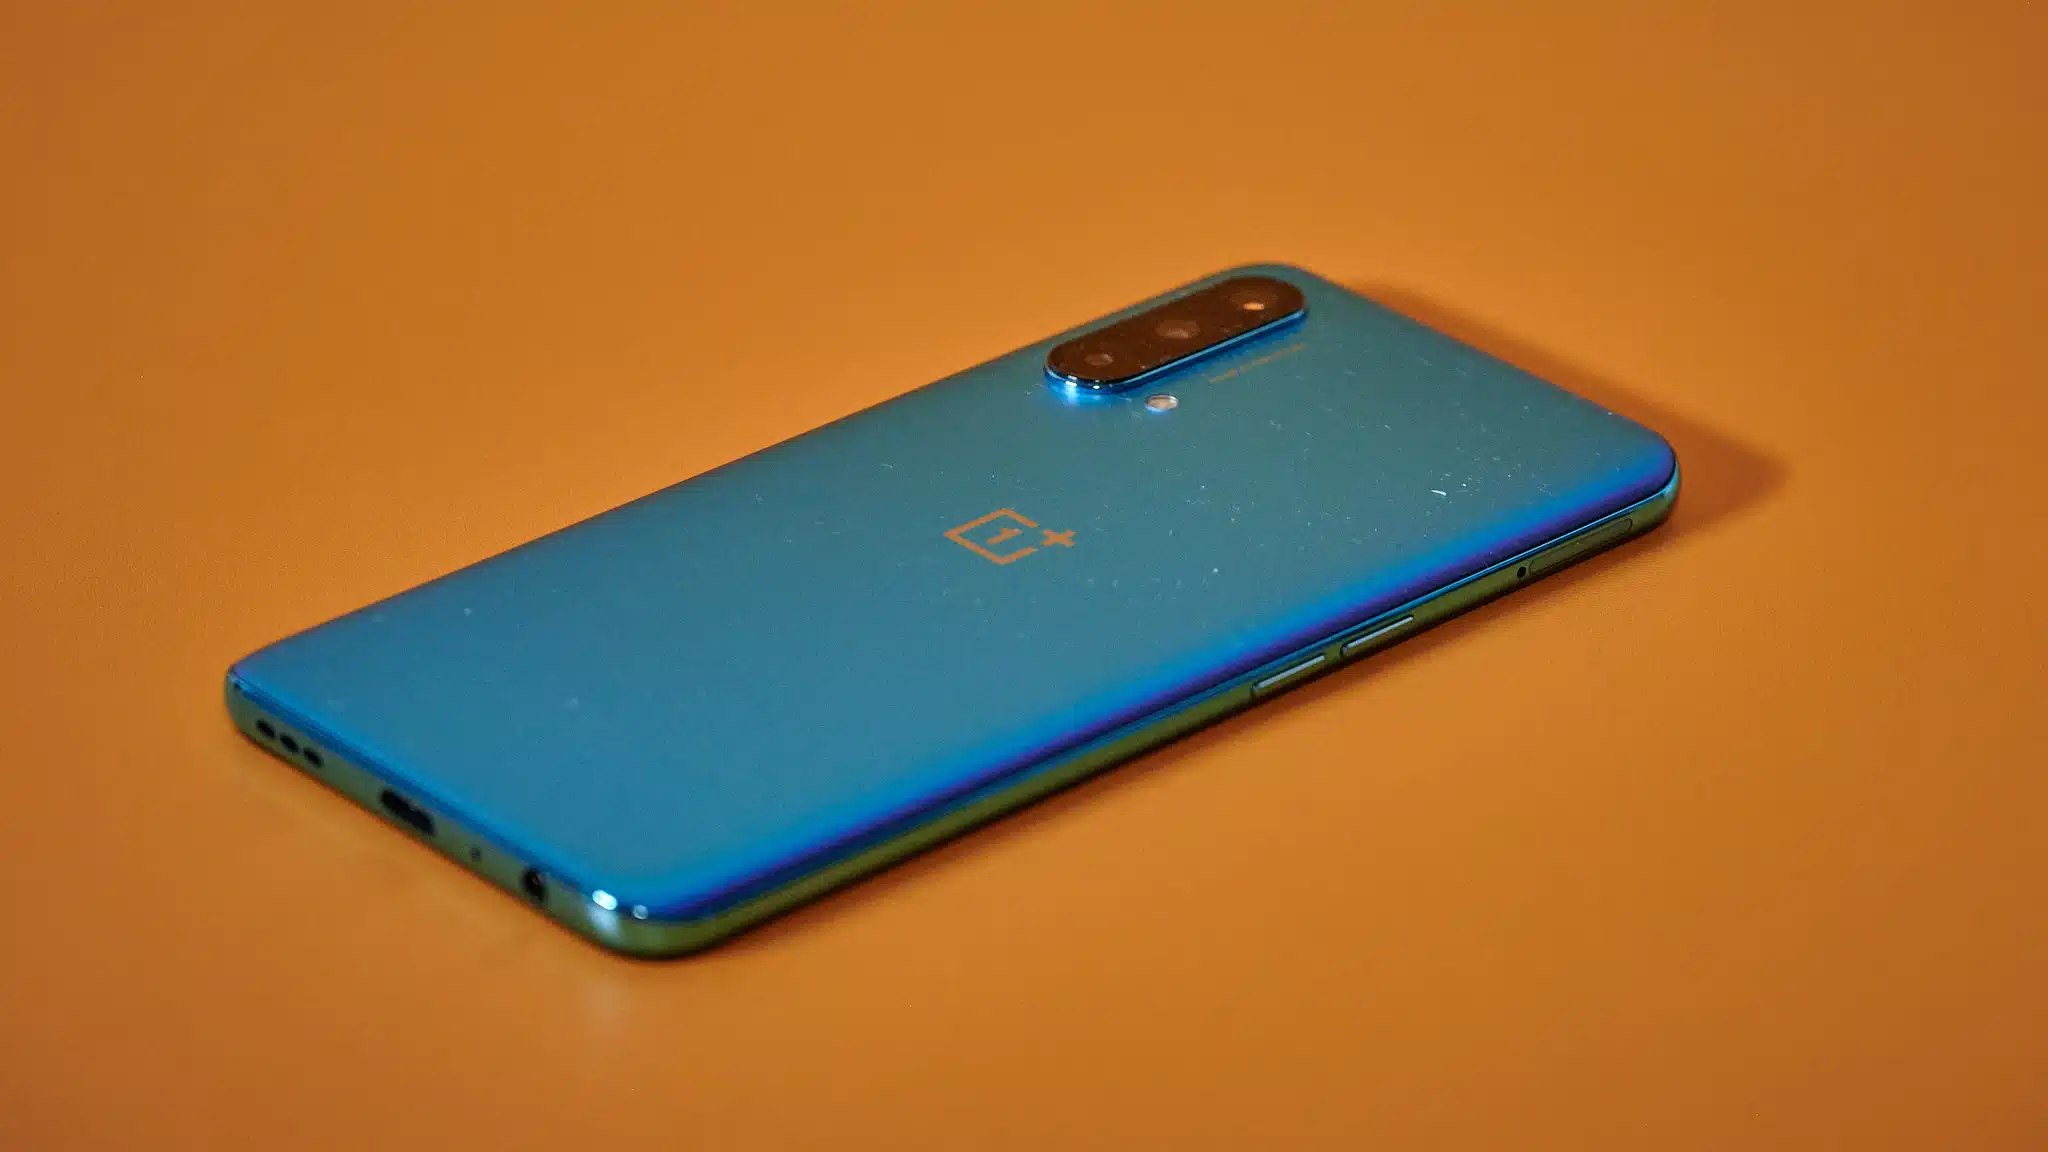 smartphone OnePlus Nord CE 5G